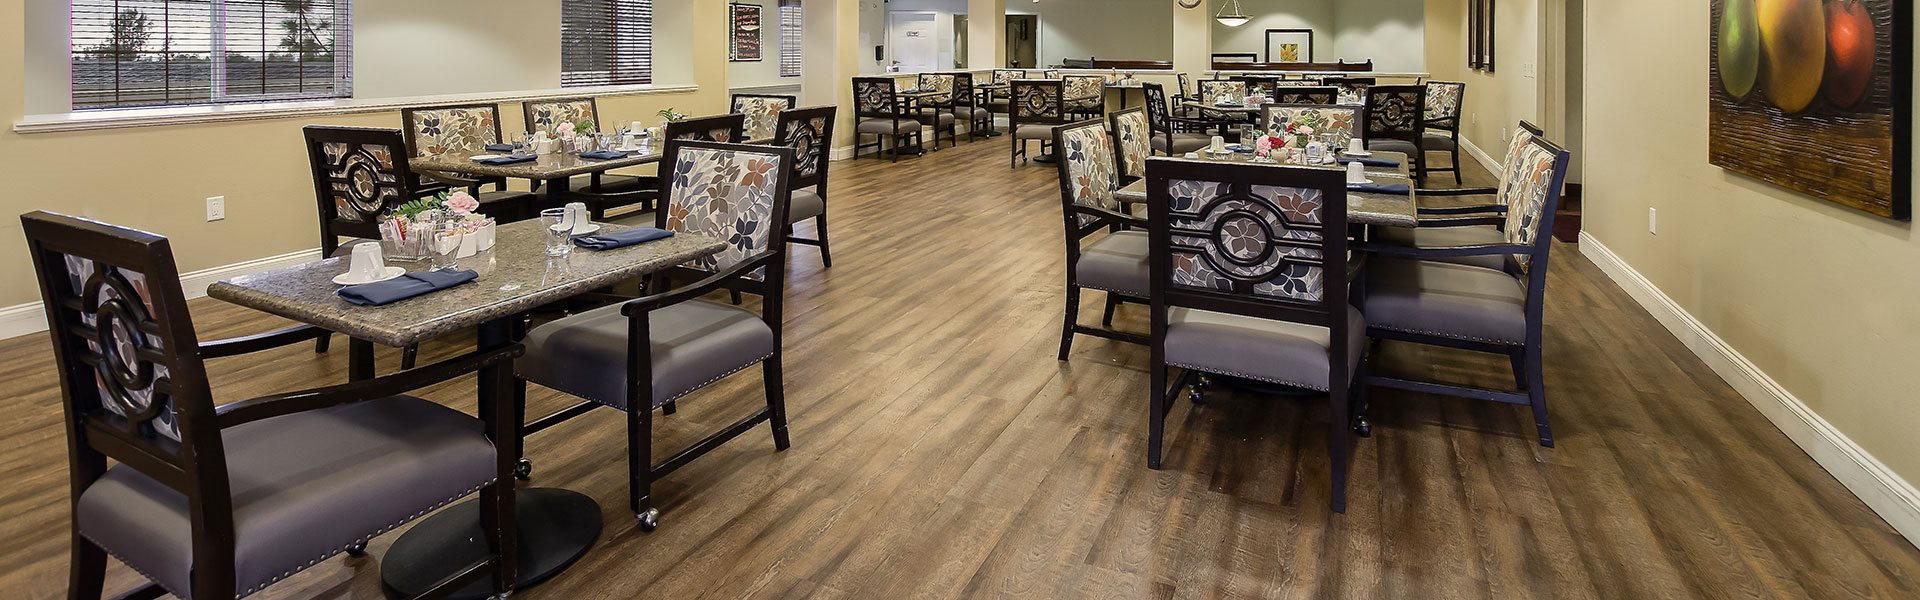 Plaza Lounge at Pacifica Senior Living Country Crest, Oroville, CA, 95966